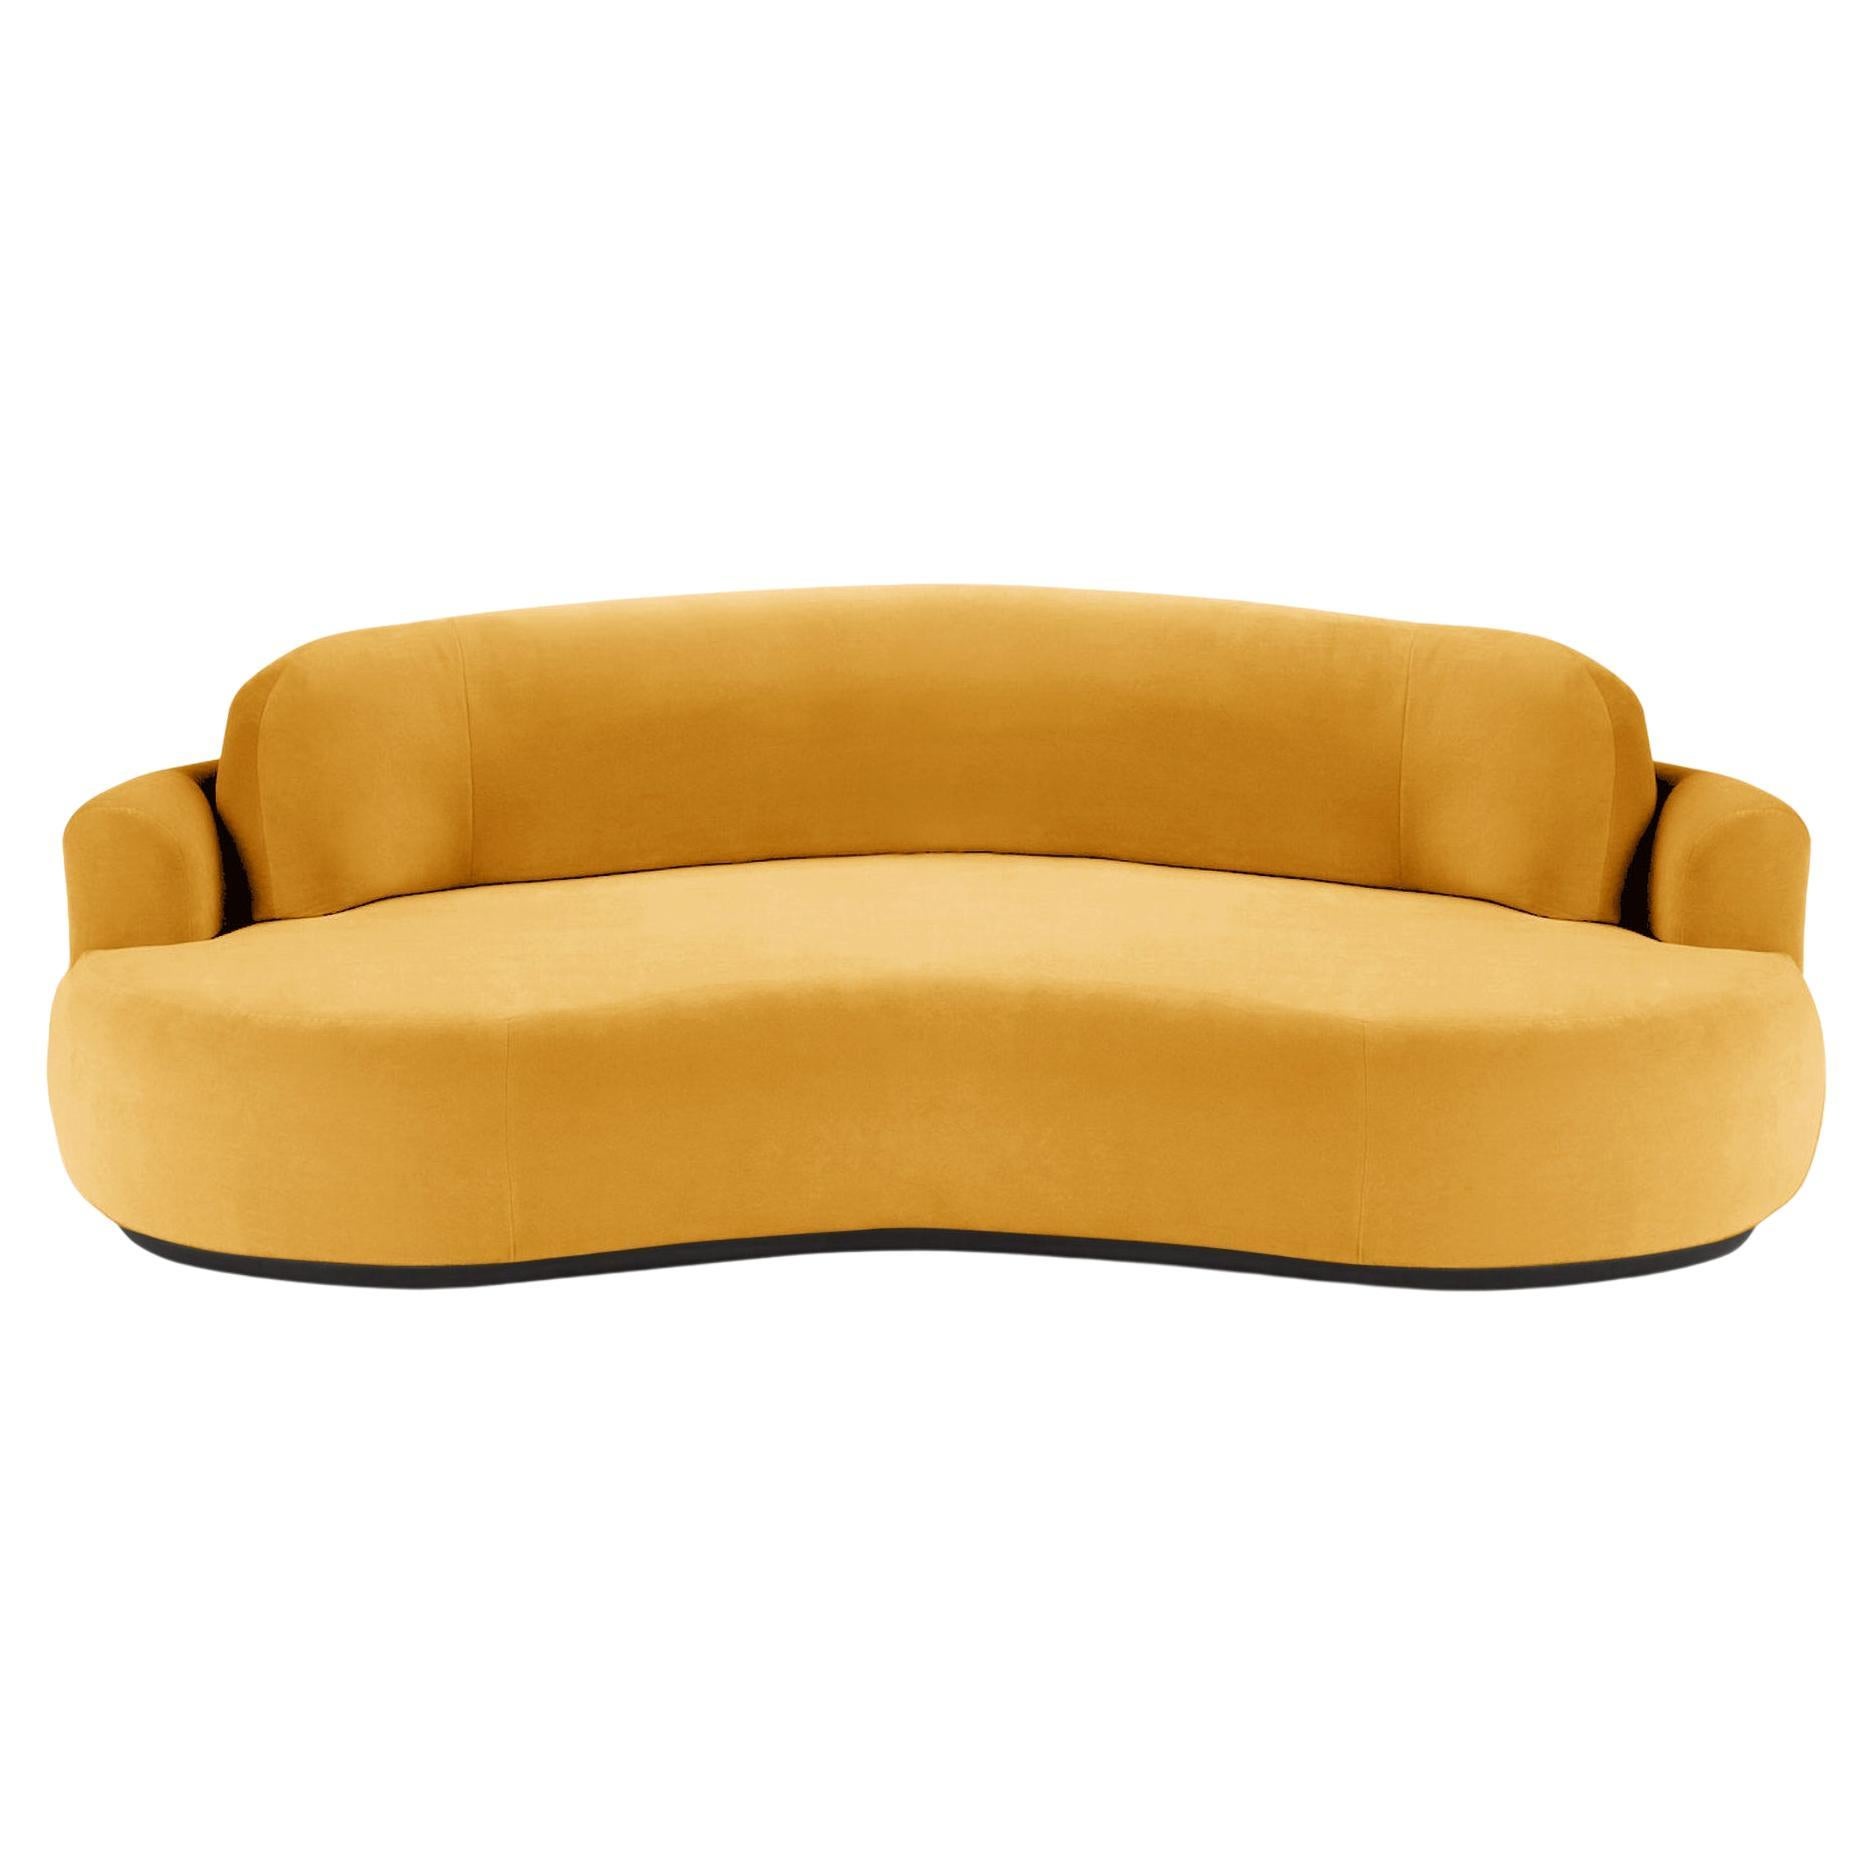 Naked Round Sofa, Medium with Beech Ash-056-5 and Corn For Sale